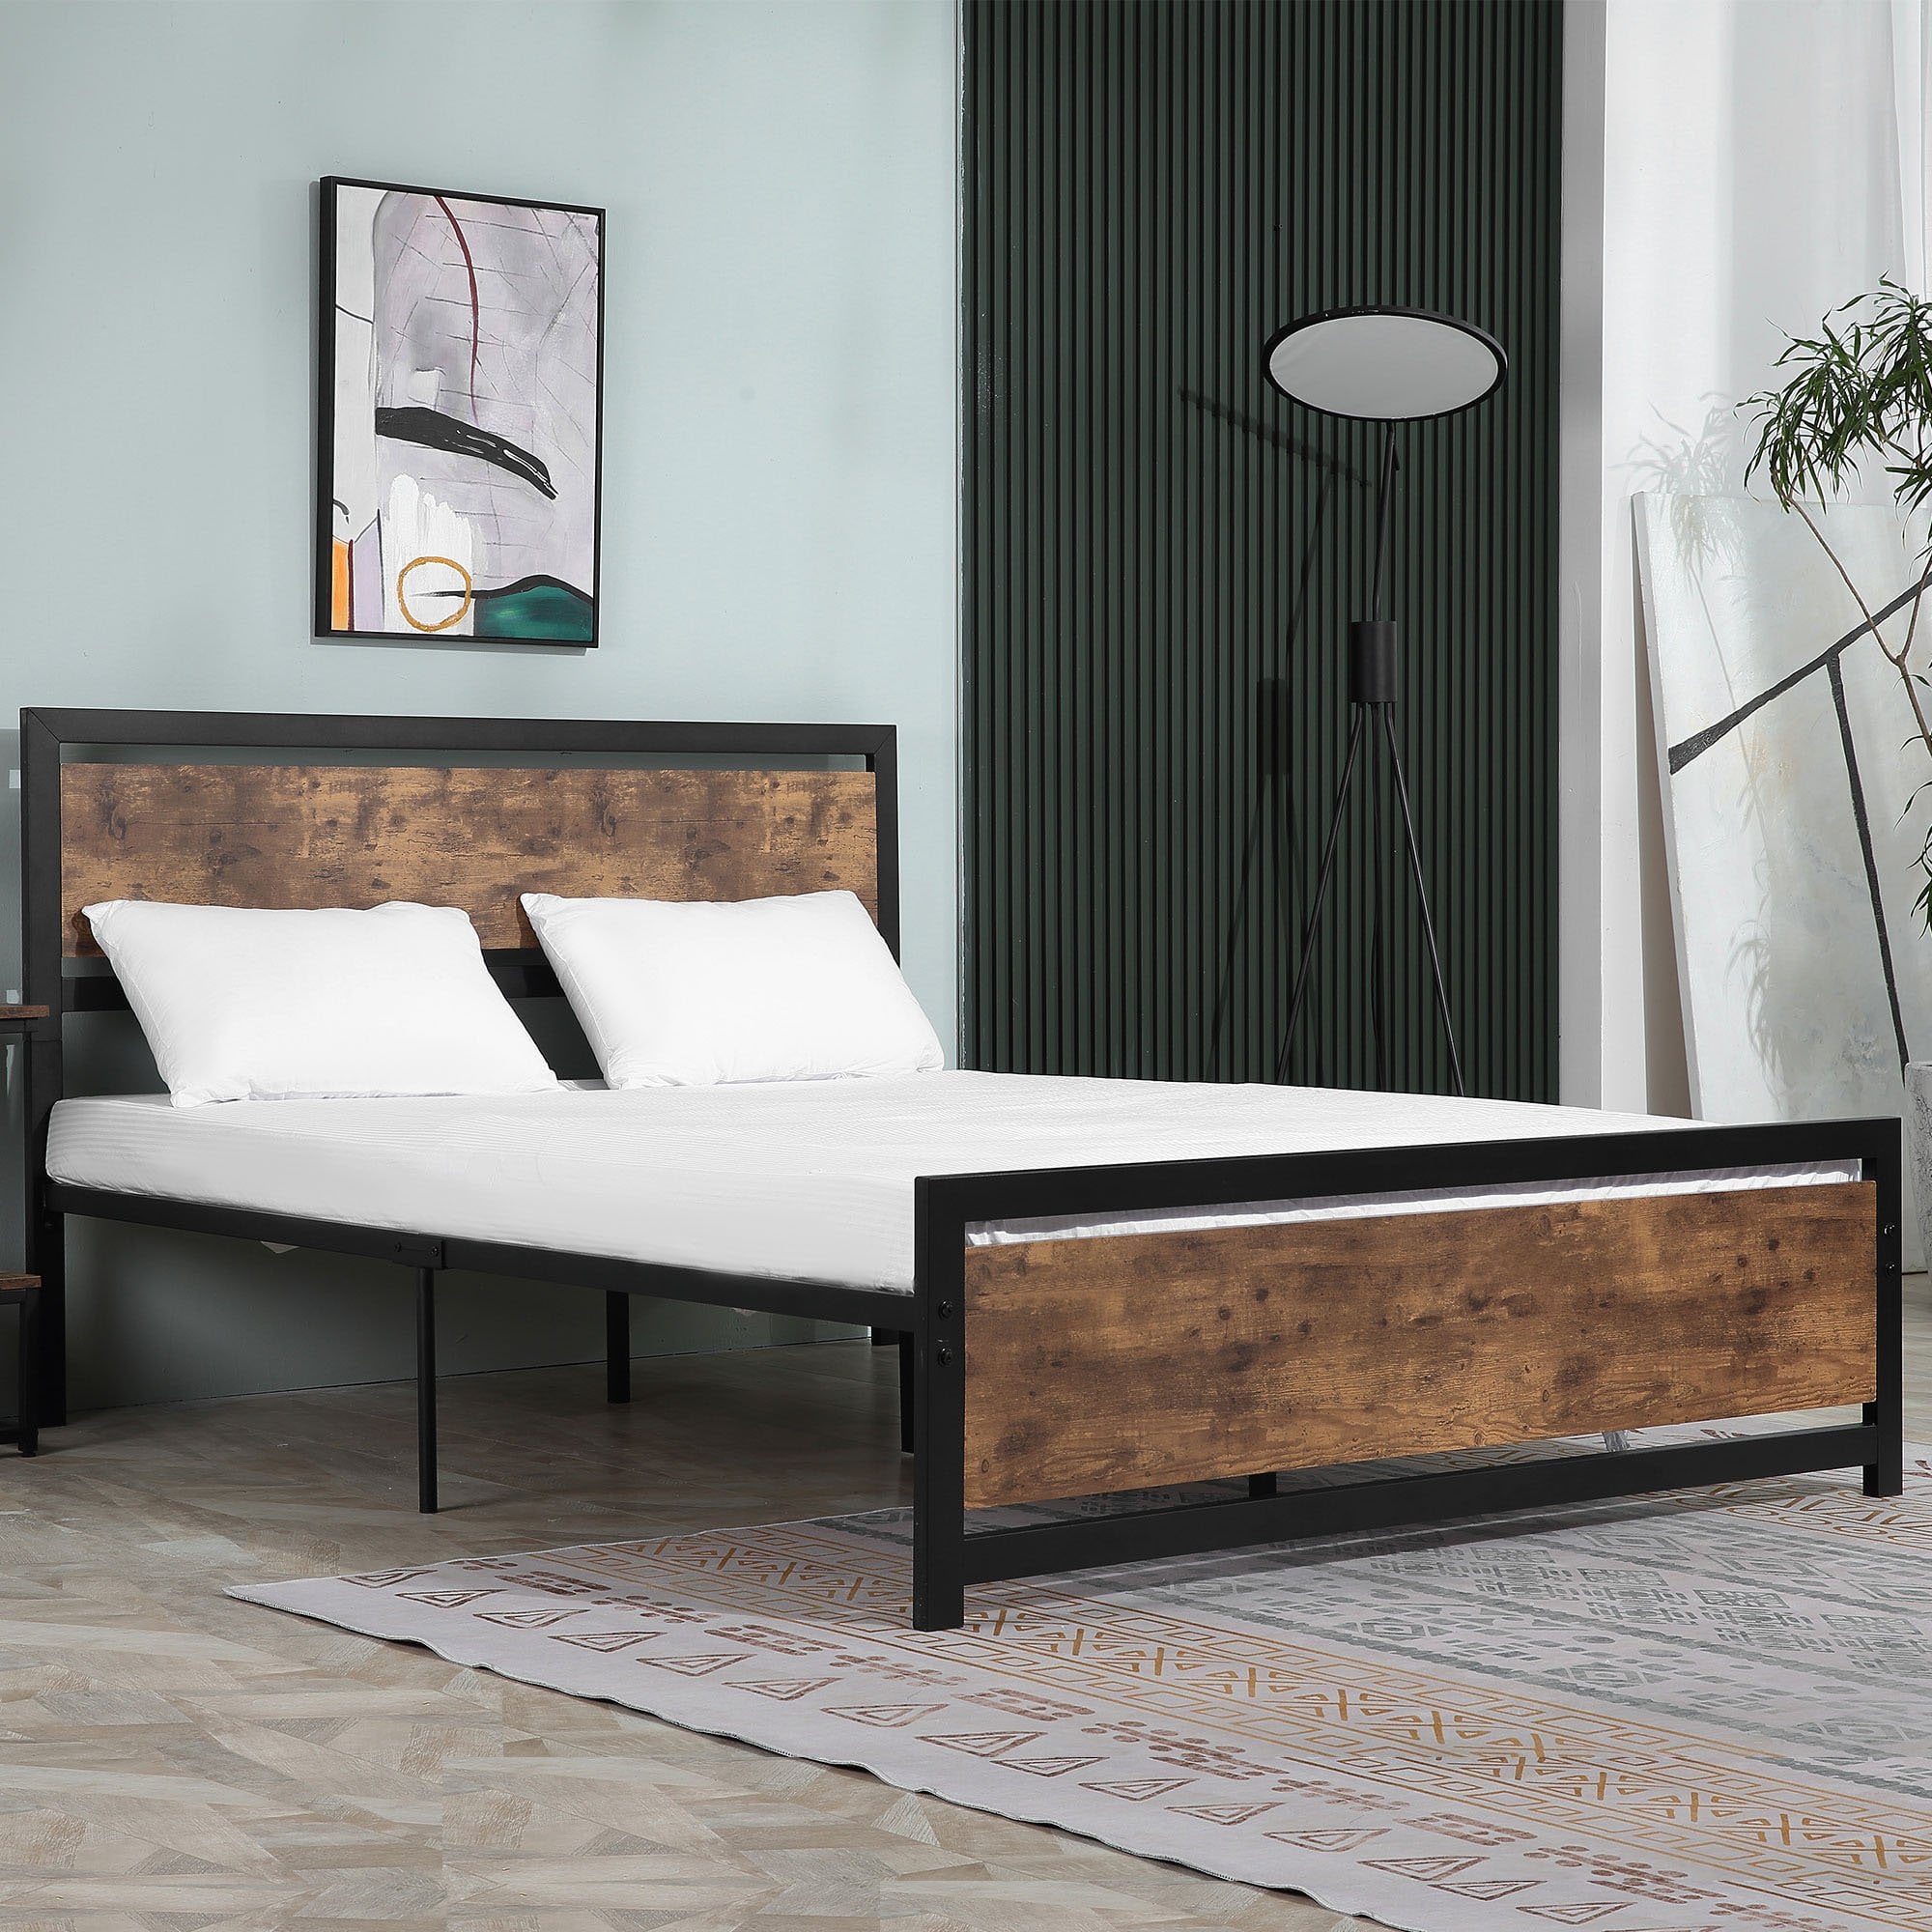 Full Bed Frame with Headboard & Footboard - Strong Slat Support Twin Size Metal Bed w/ Underbed Storage Space - No Box Spring Needed - 160x208x103cm H